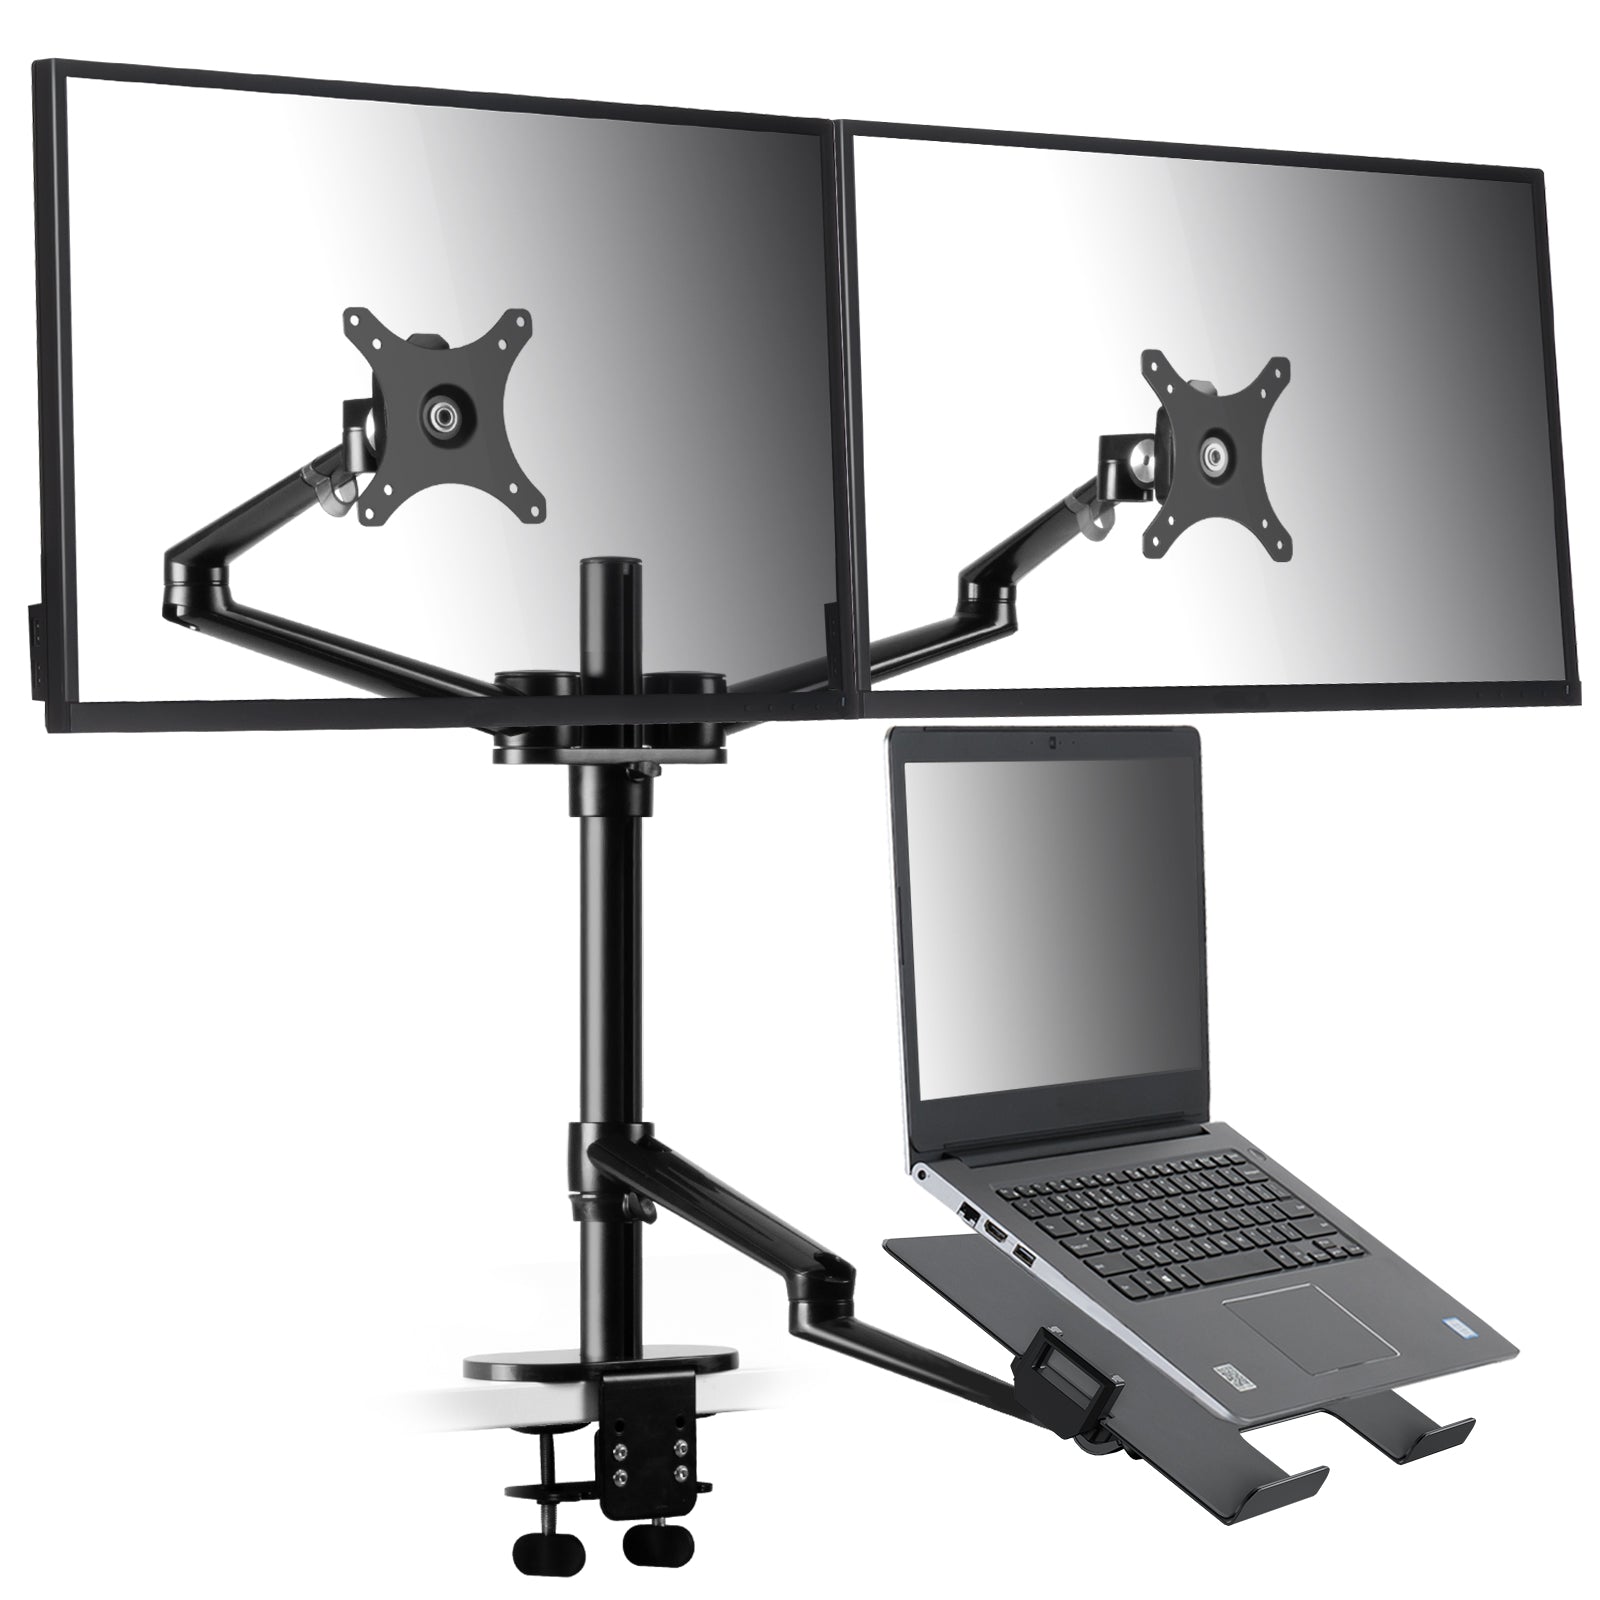 Viozon Monitor and Laptop Mount, 3-in-1 Adjustable Triple Monitor Arm Desk  Mounts, Dual Desk Arm Stand/Holder for 17 to 27 Inch LCD Computer Screens,  Extra Tray Fits 12 to 17 inch Laptops